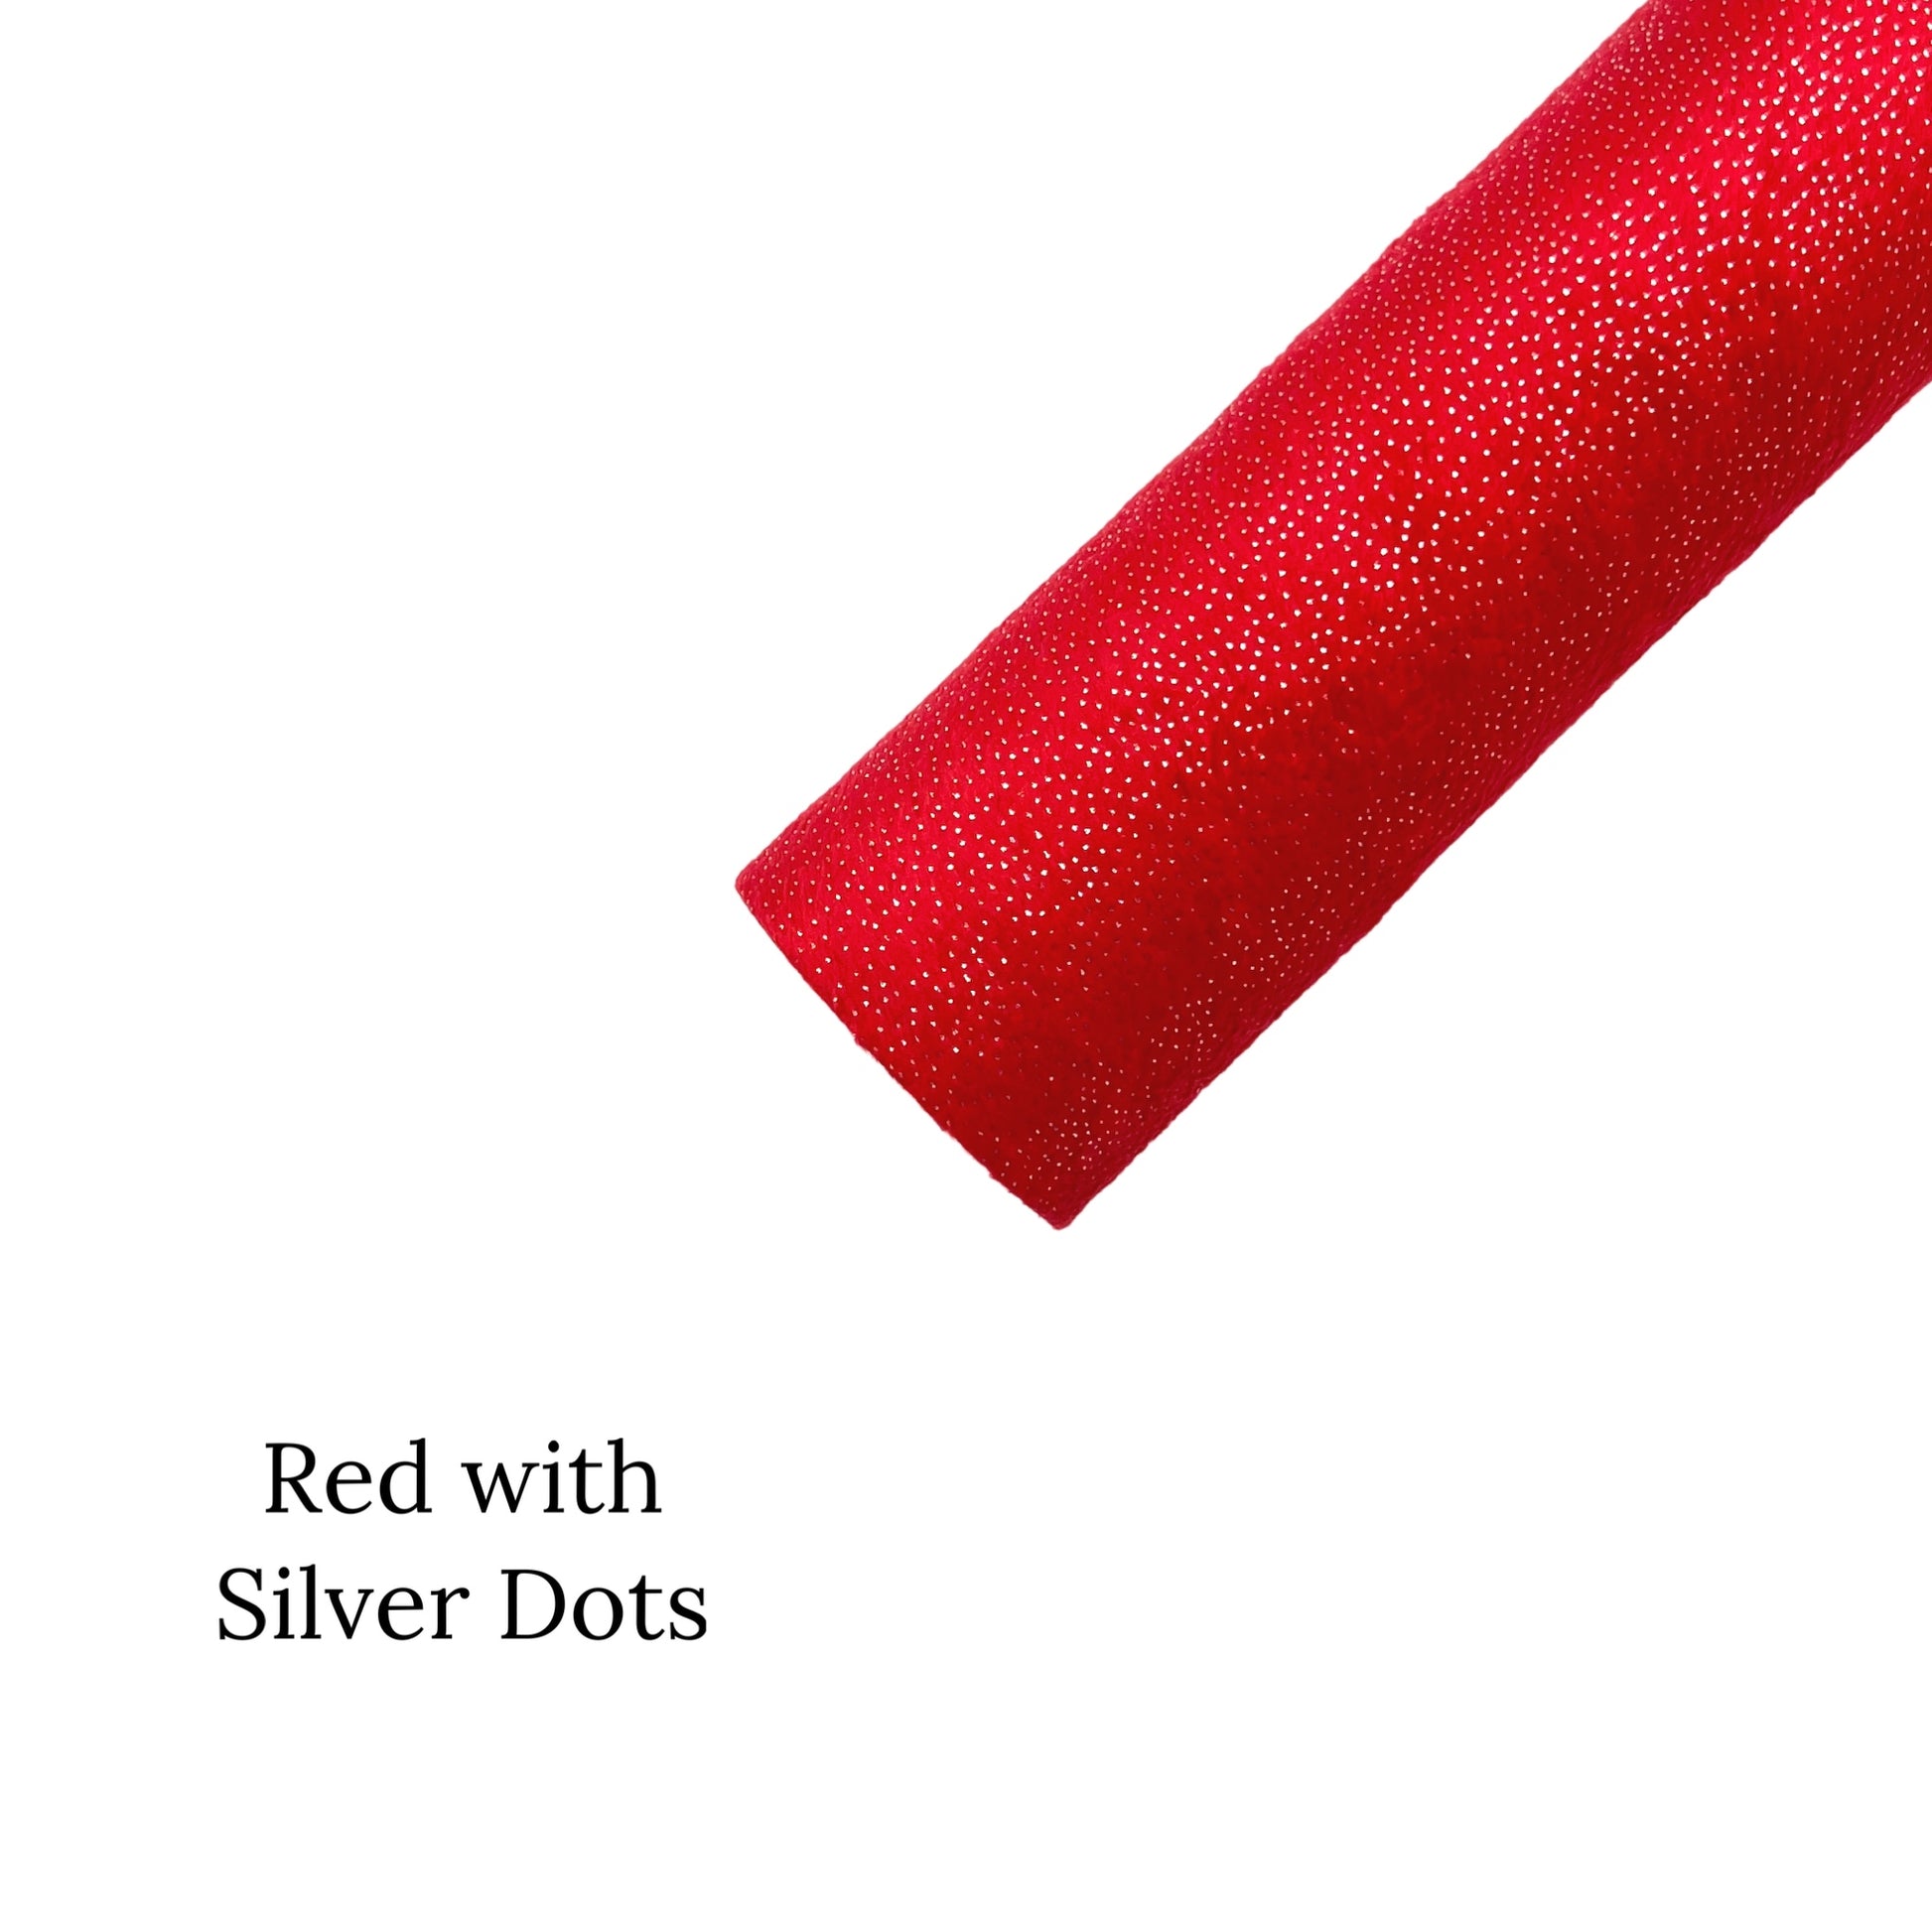 Rolled red faux leather sheets with silver dots